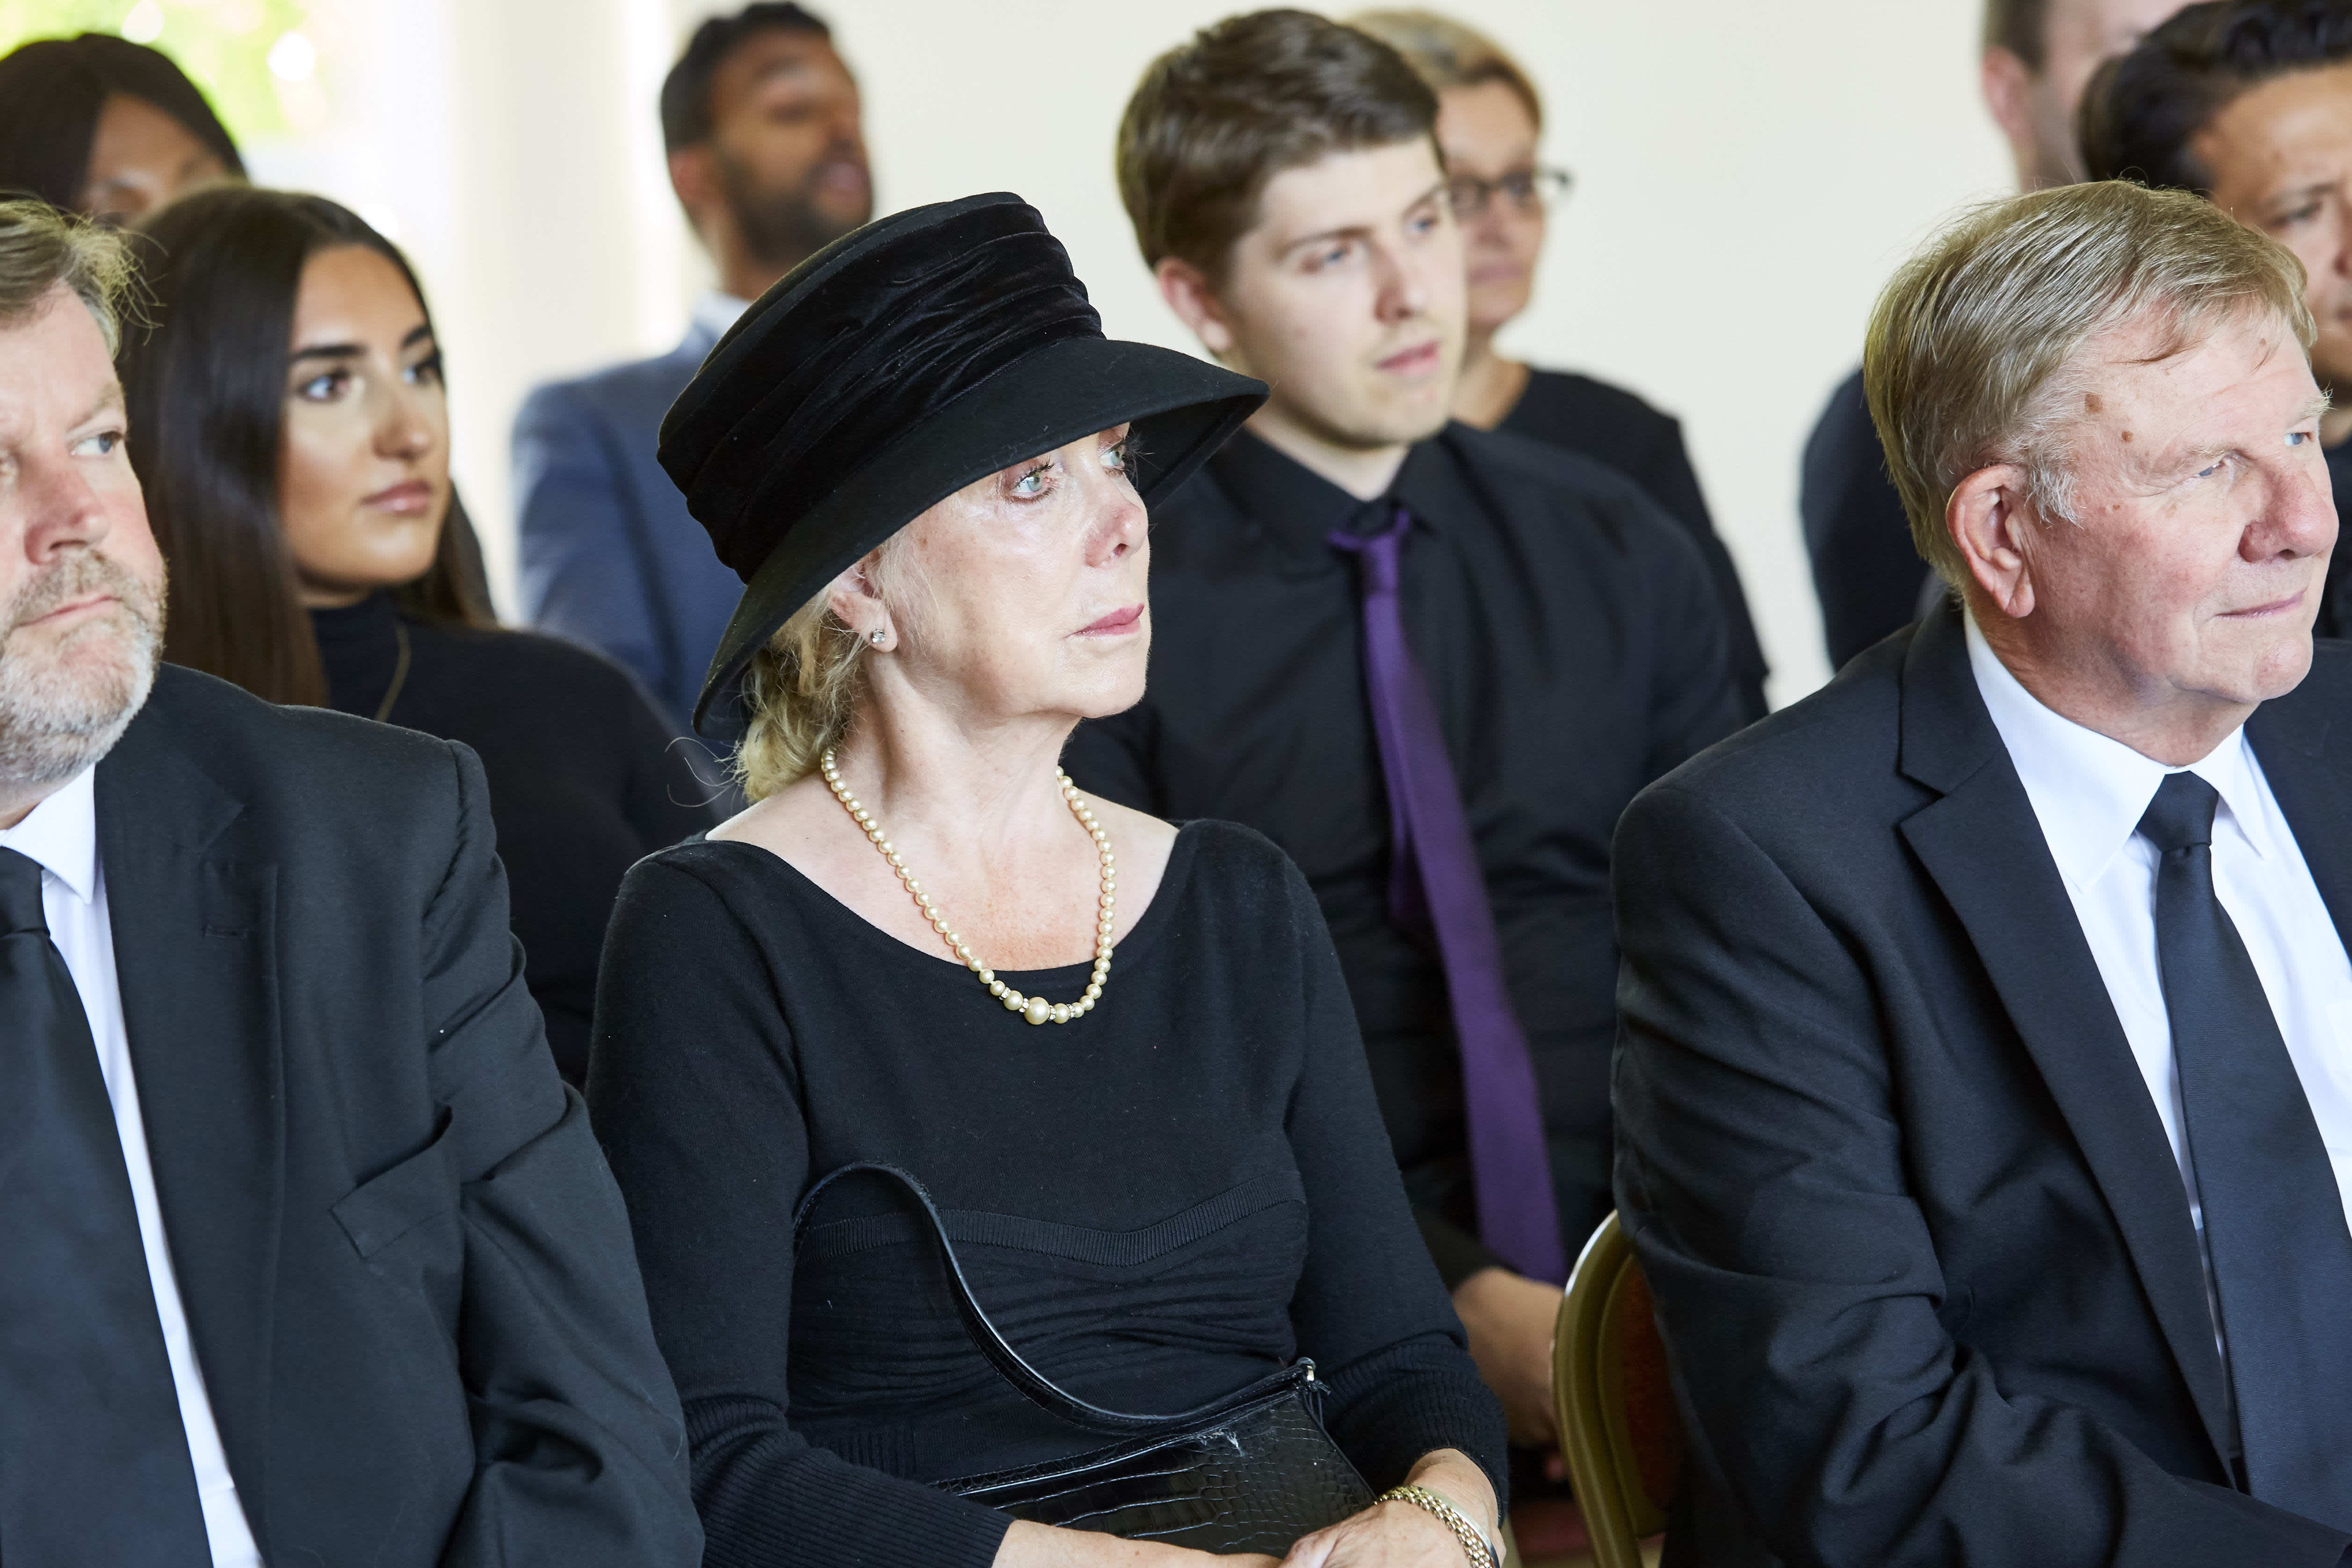 What to wear at a funeral - Co-op Funeralcare